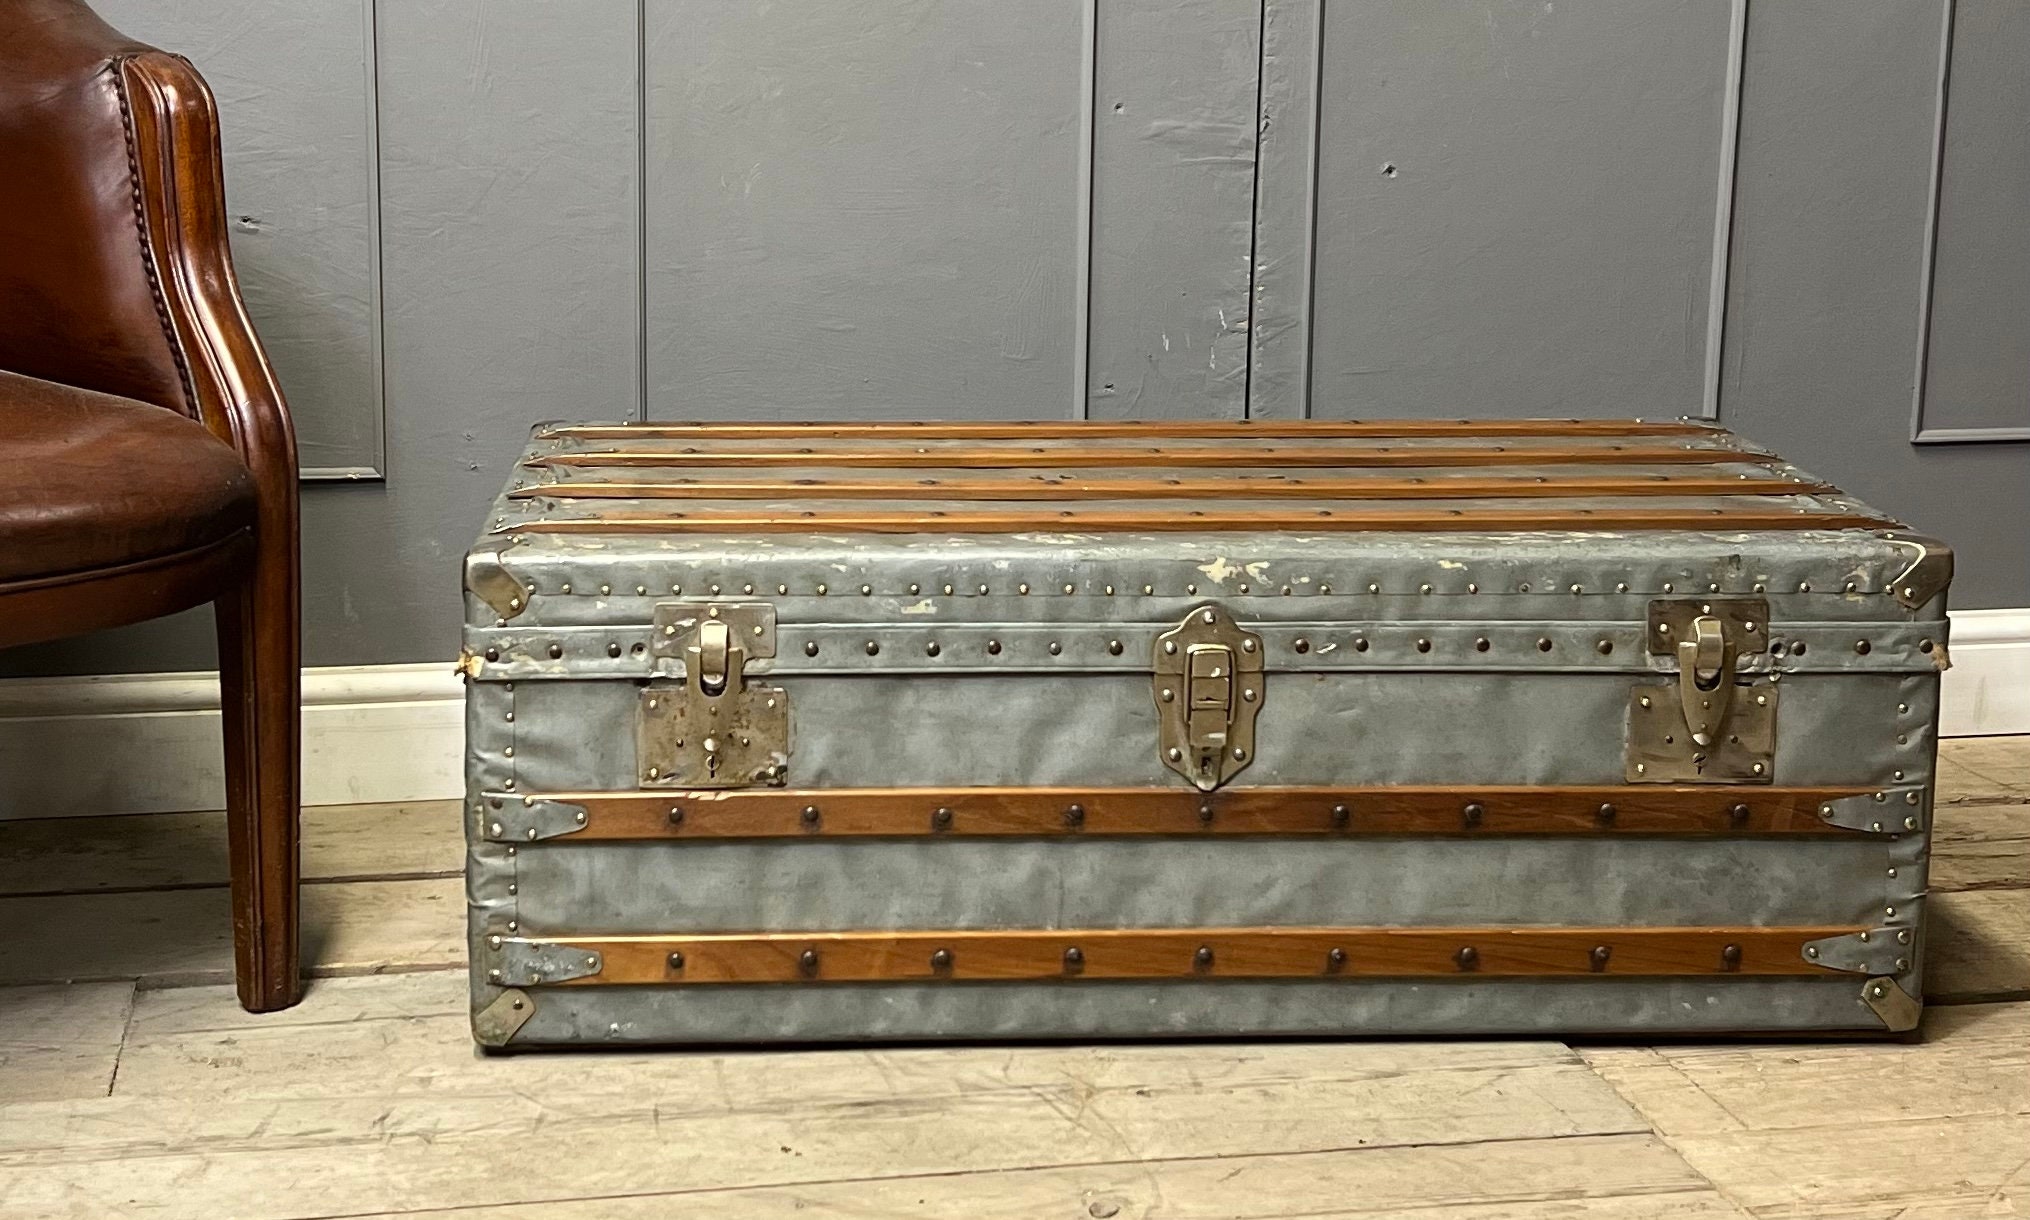 Antique Rare Zinc Covered Travel Trunk Chest Coffee Table 